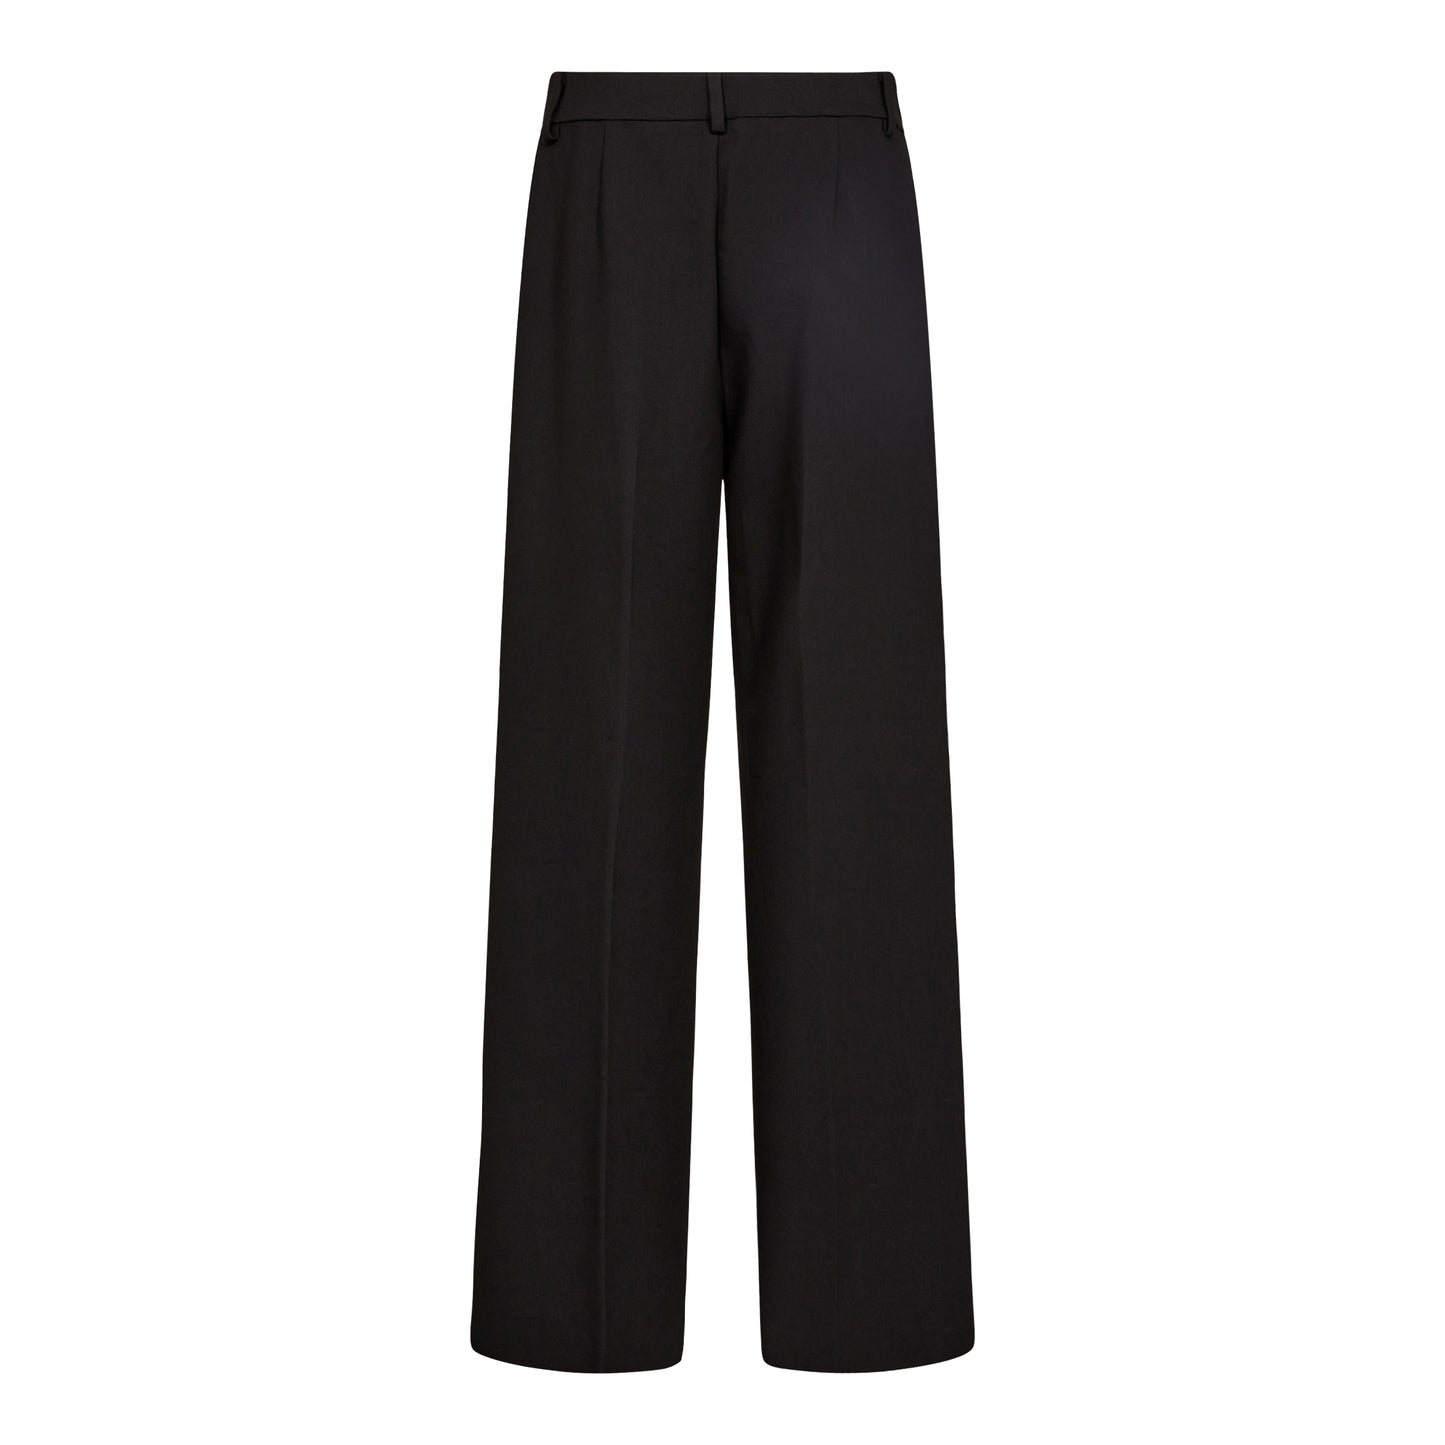 Cocouture - VolaCC Wide Pant - Black